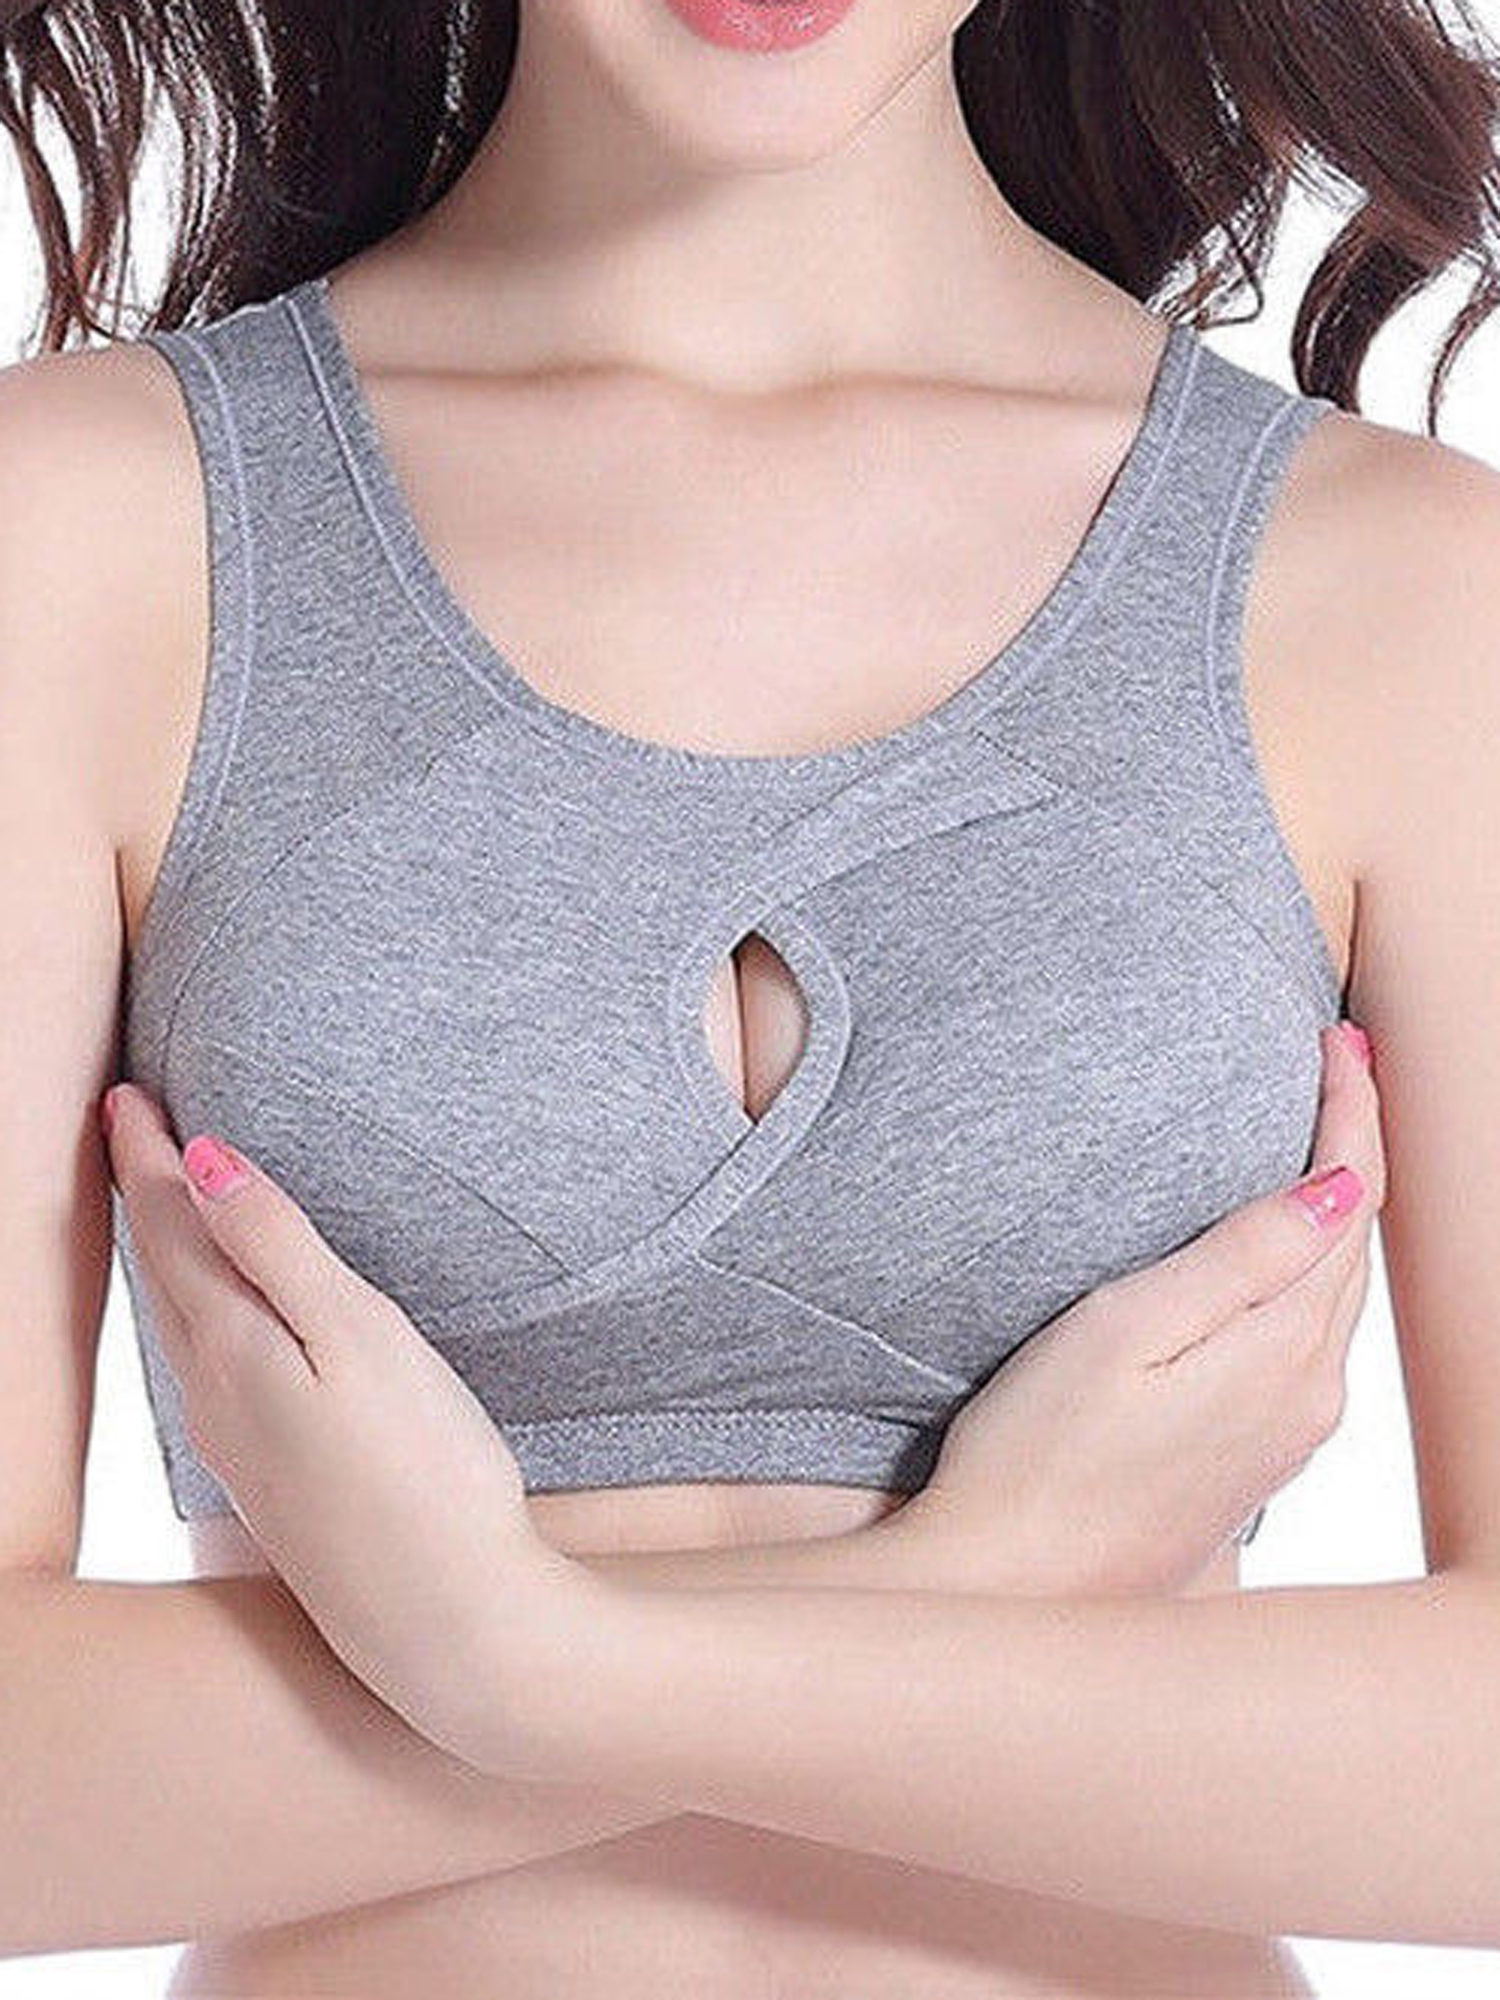 Bebiullo Sports Bra High Stretch Breathable Top Fitness Women Padded for Running Yoga Gym Crop Bra Gradient Sport Bra - image 1 of 6